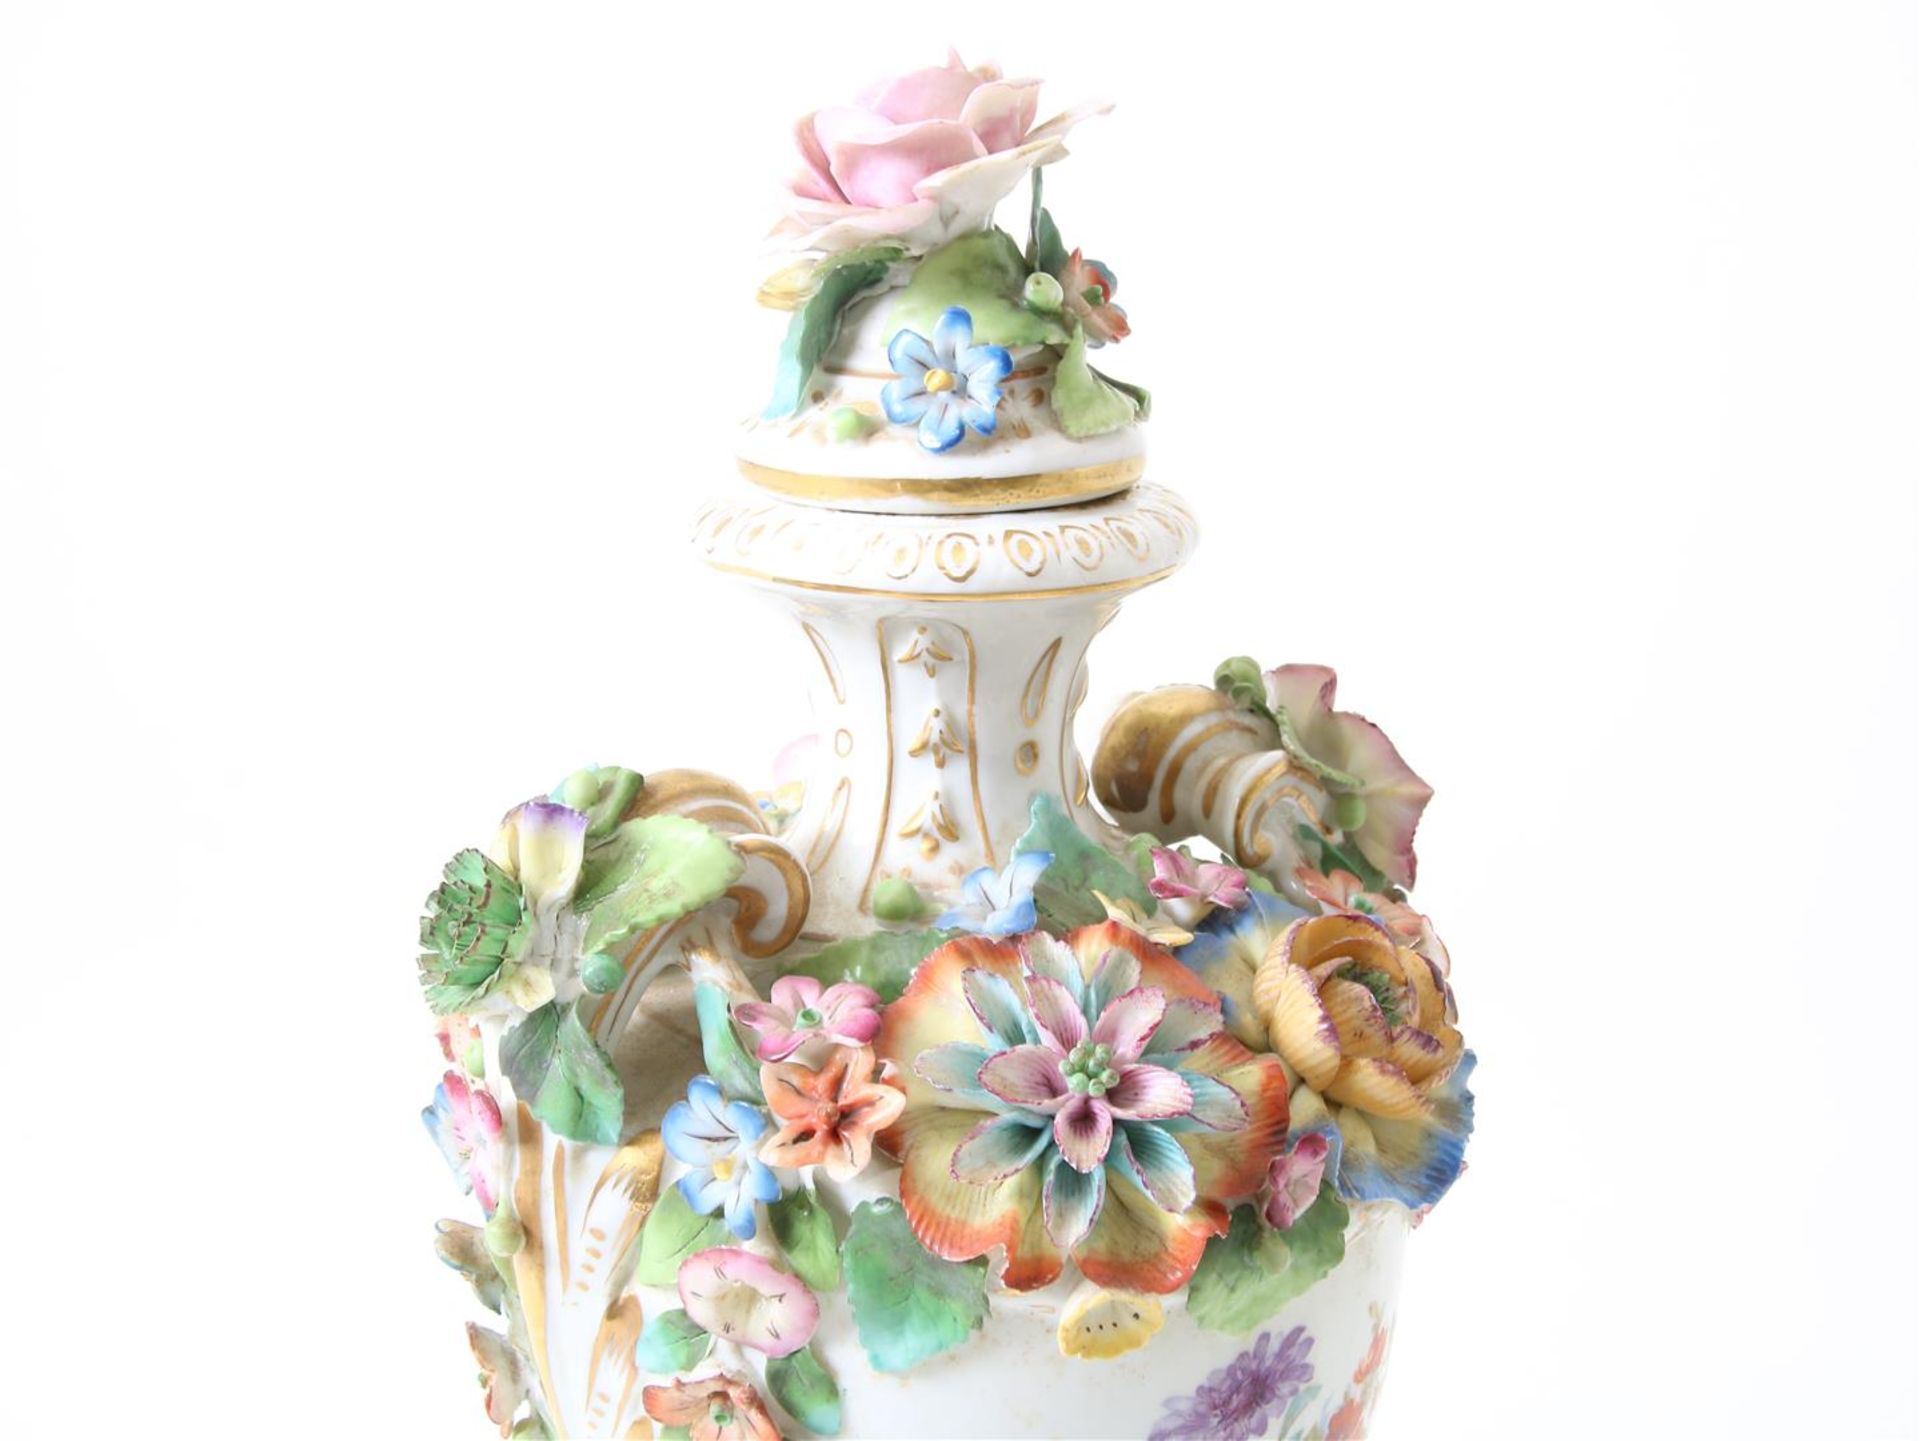 Lot of a porcelain decorative vase with decor of a romantic scene and relief of flowers, marked on - Image 2 of 4